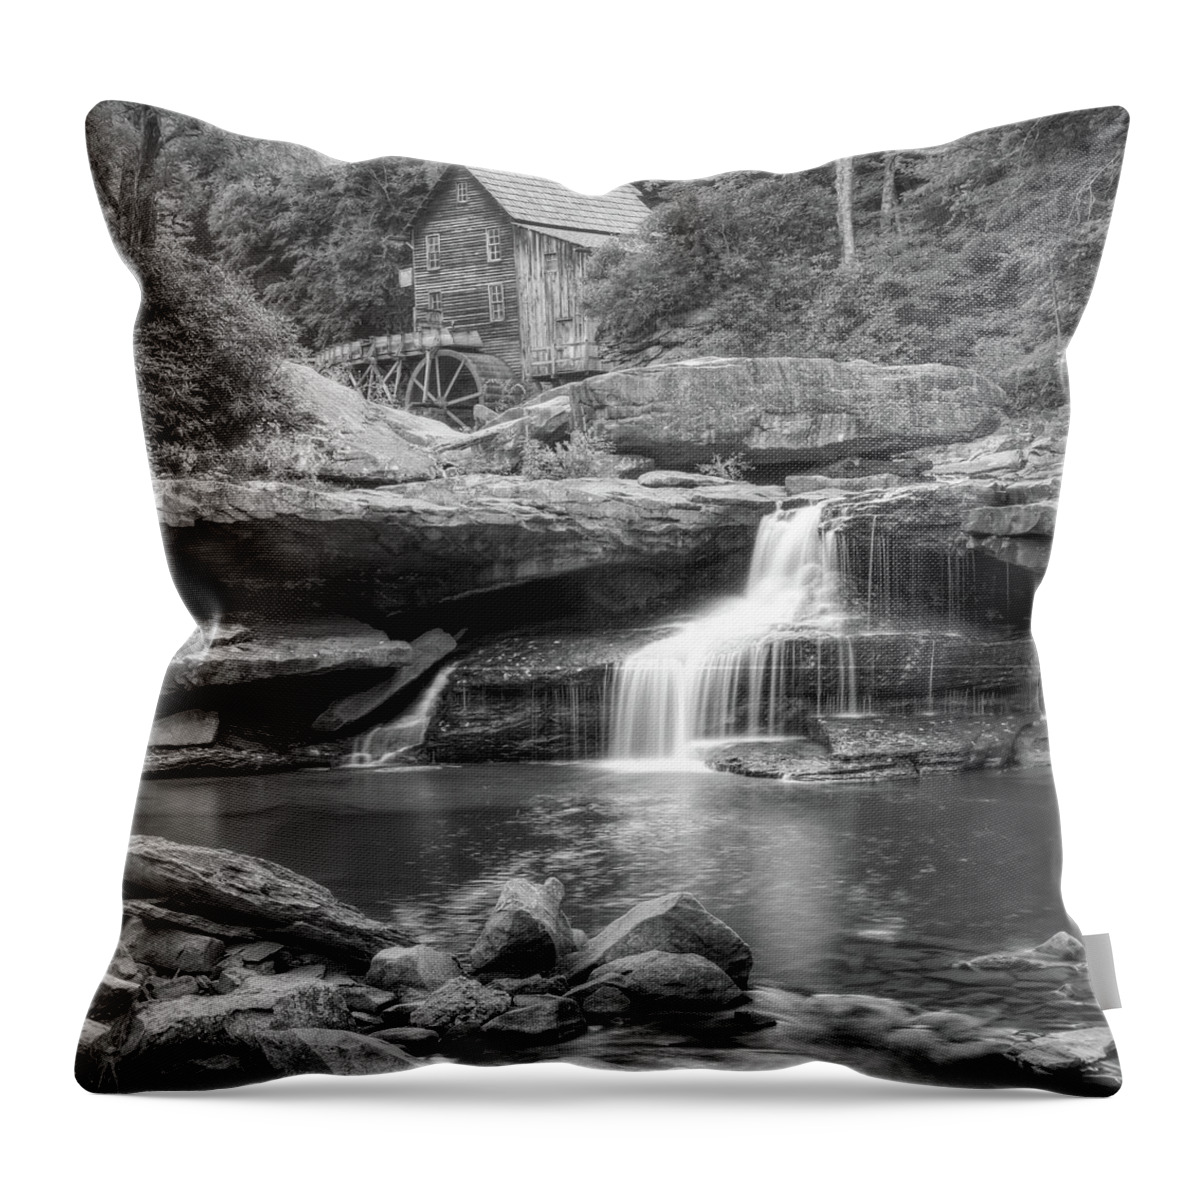 America Throw Pillow featuring the photograph Glade Creek Grist Mill Waterfall - Black and White - Square Format by Gregory Ballos